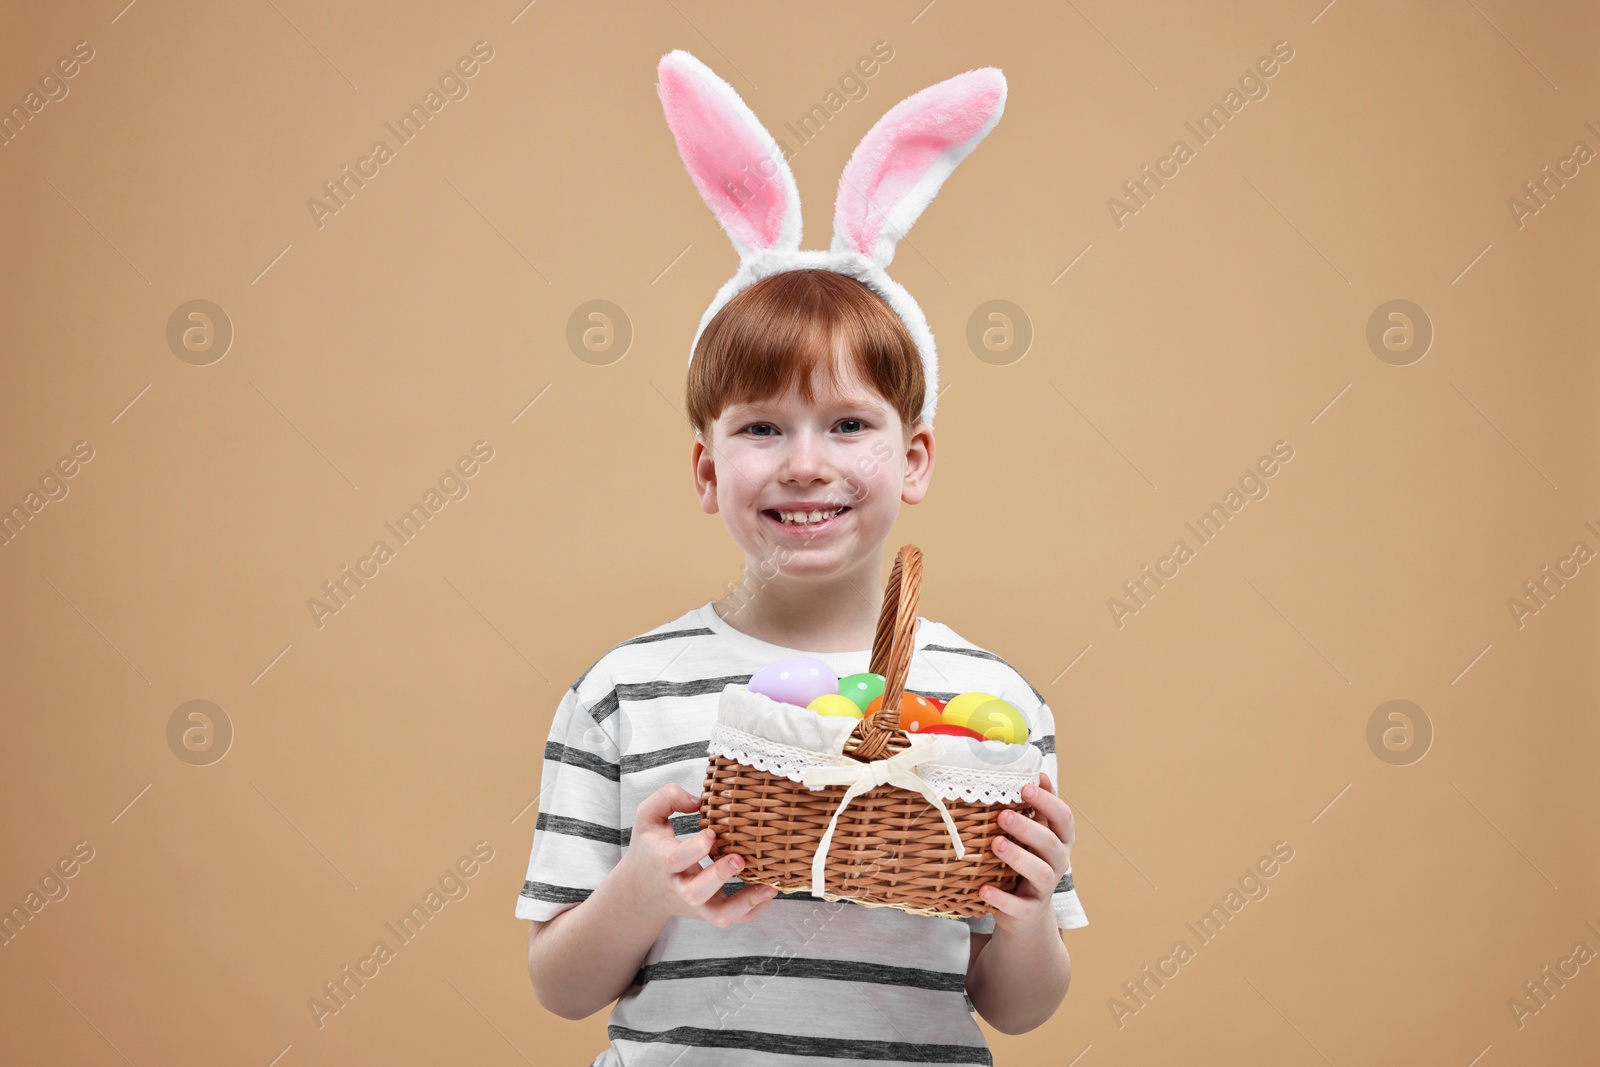 Photo of Easter celebration. Cute little boy with bunny ears and wicker basket full of painted eggs on dark beige background